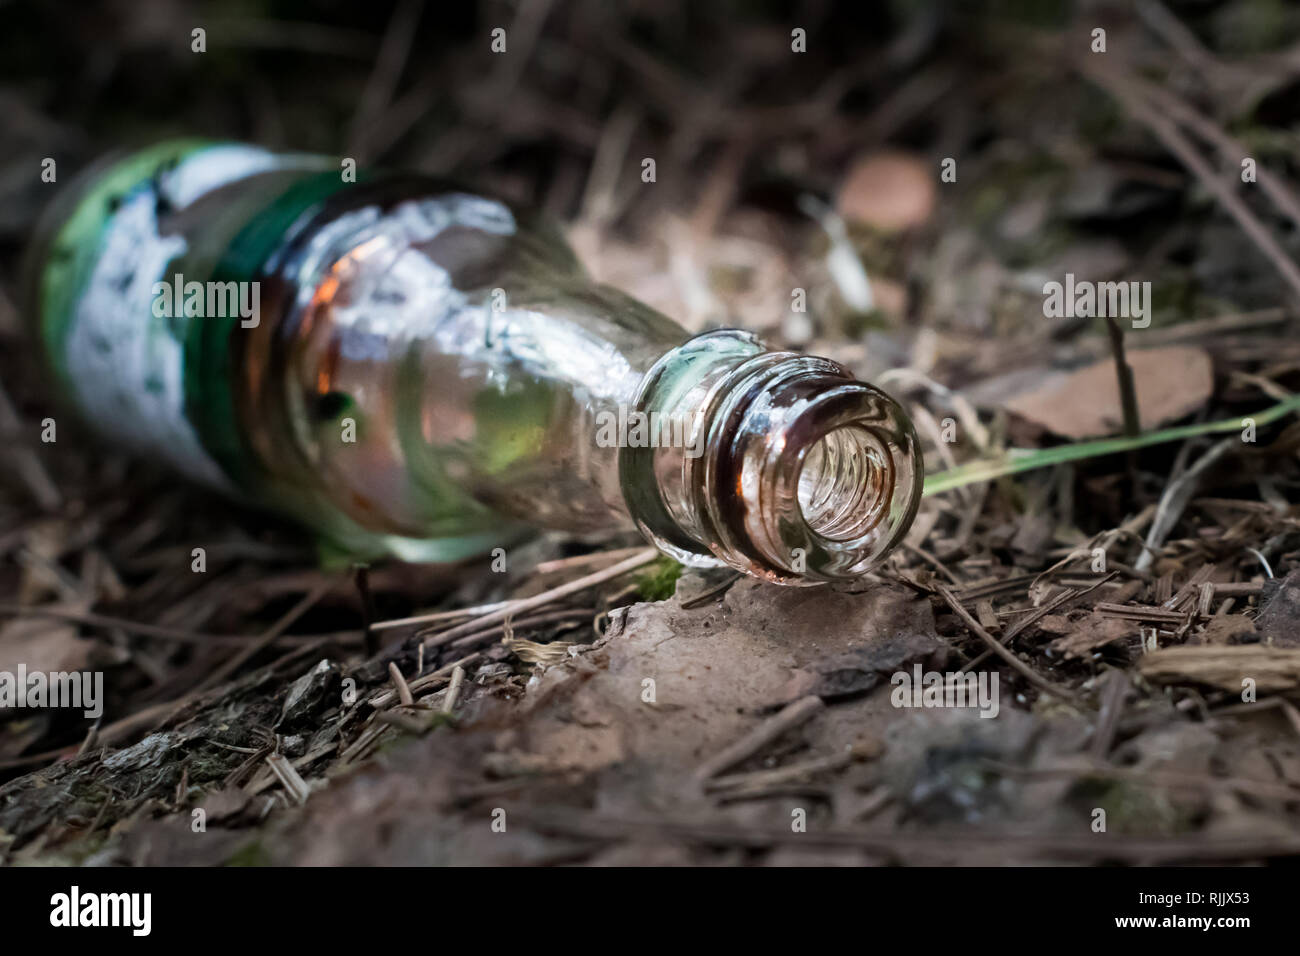 Small bottle thrown at the foot of a pine tree Stock Photo